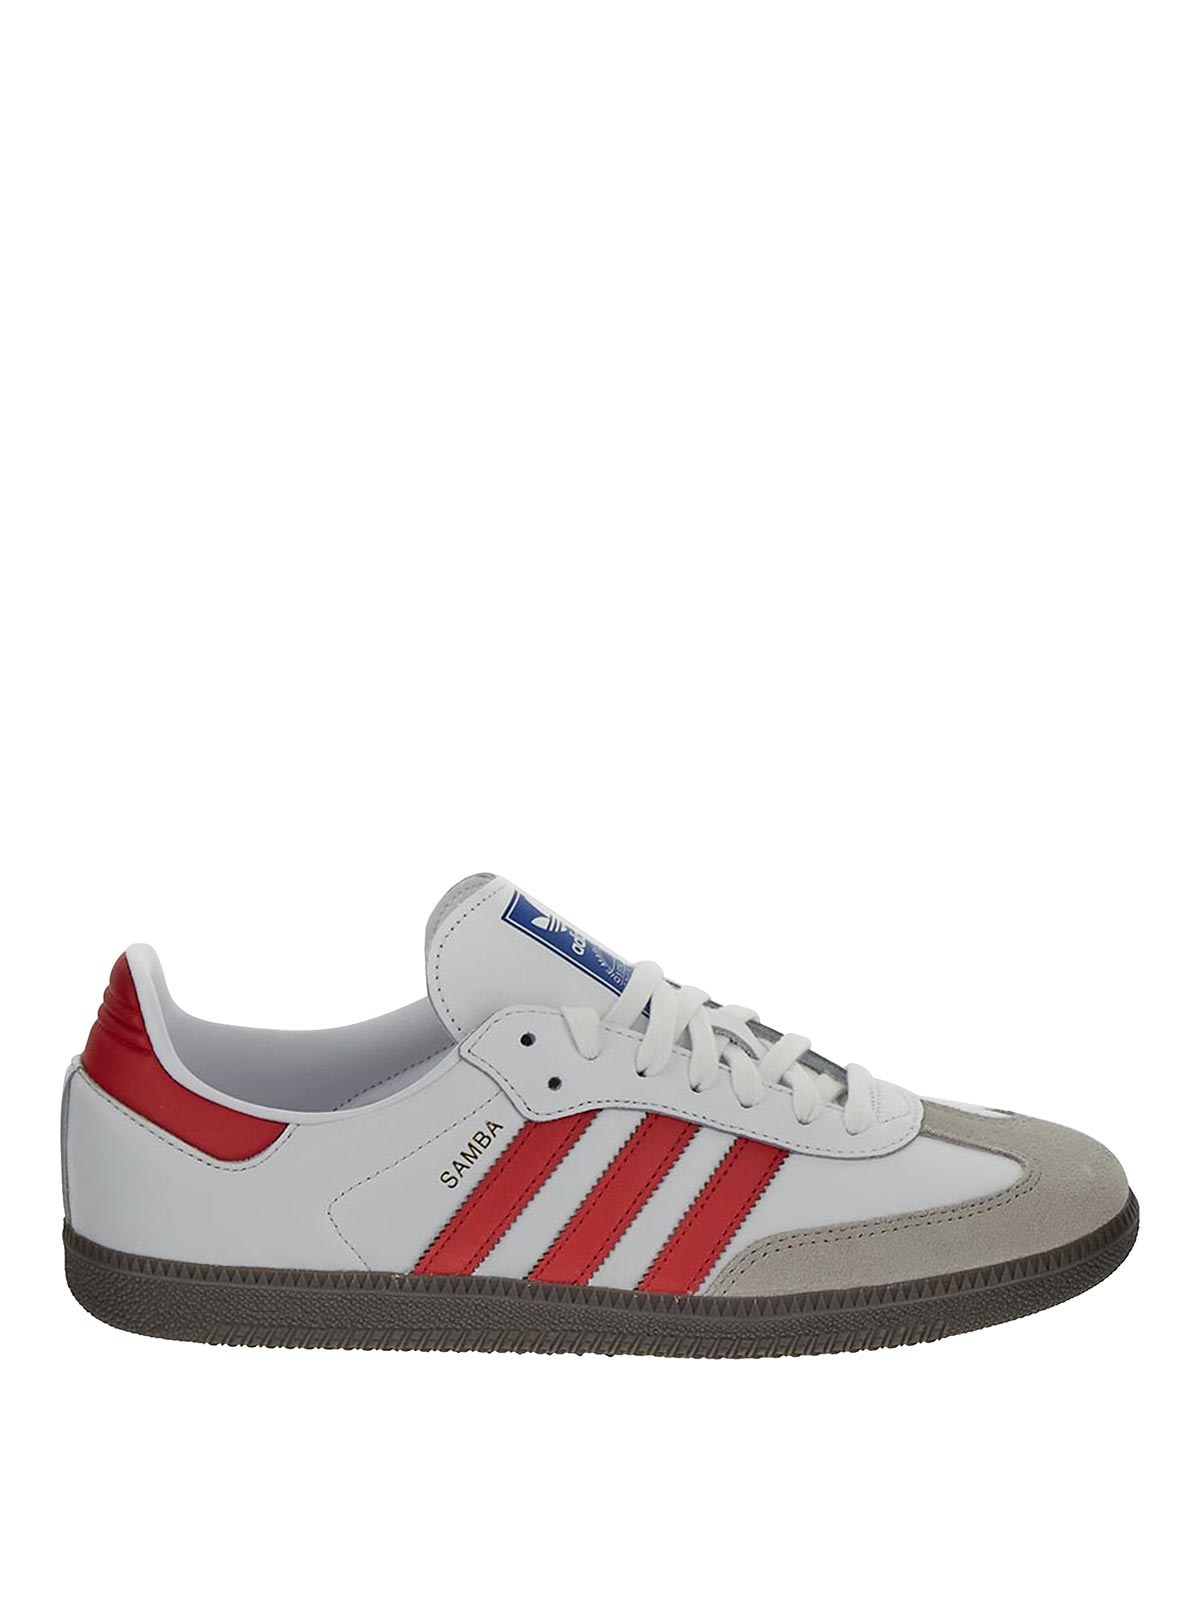 Adidas Originals Low Top Sneakers In White With Iconic Red